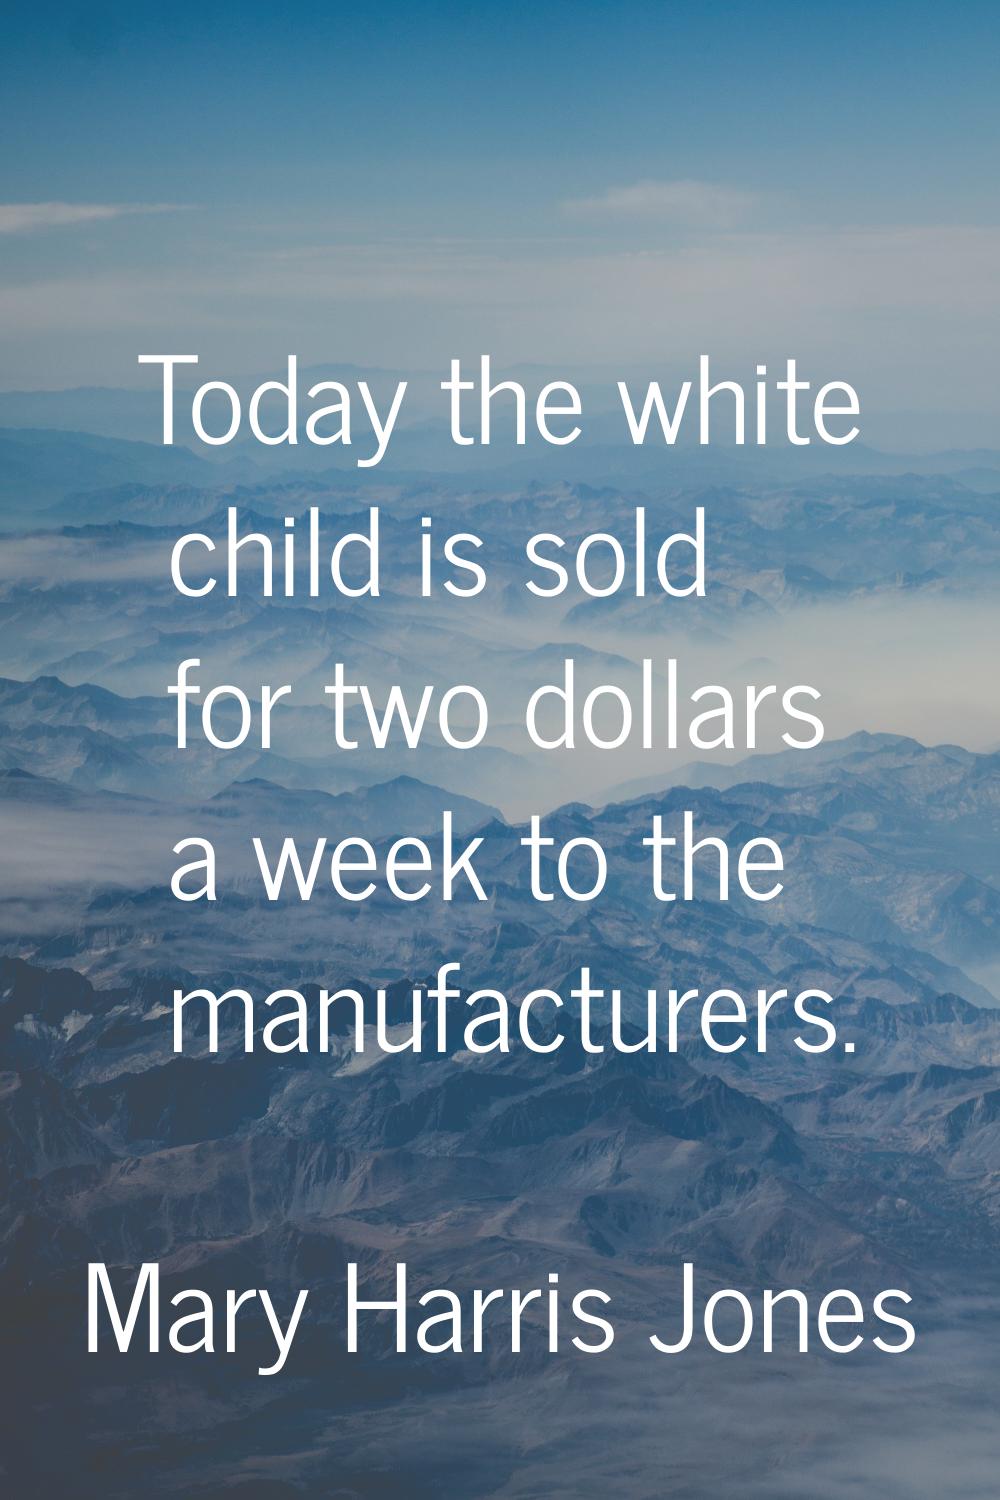 Today the white child is sold for two dollars a week to the manufacturers.